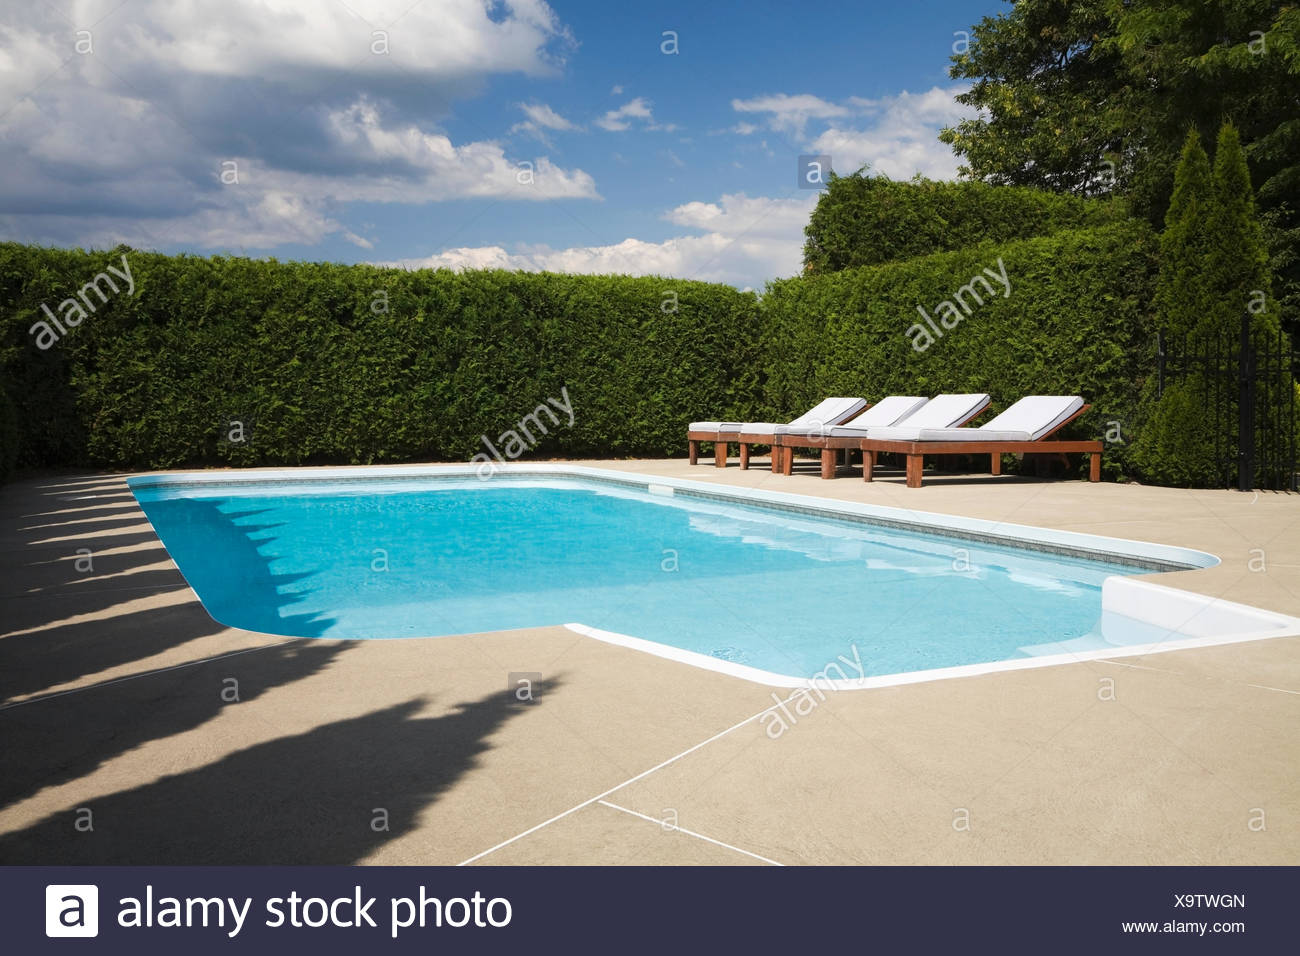 Inground Swimming Pool Surrounded By A Cedar Tree Hedge In A Backyard Quebec Canada Stock Photo Alamy